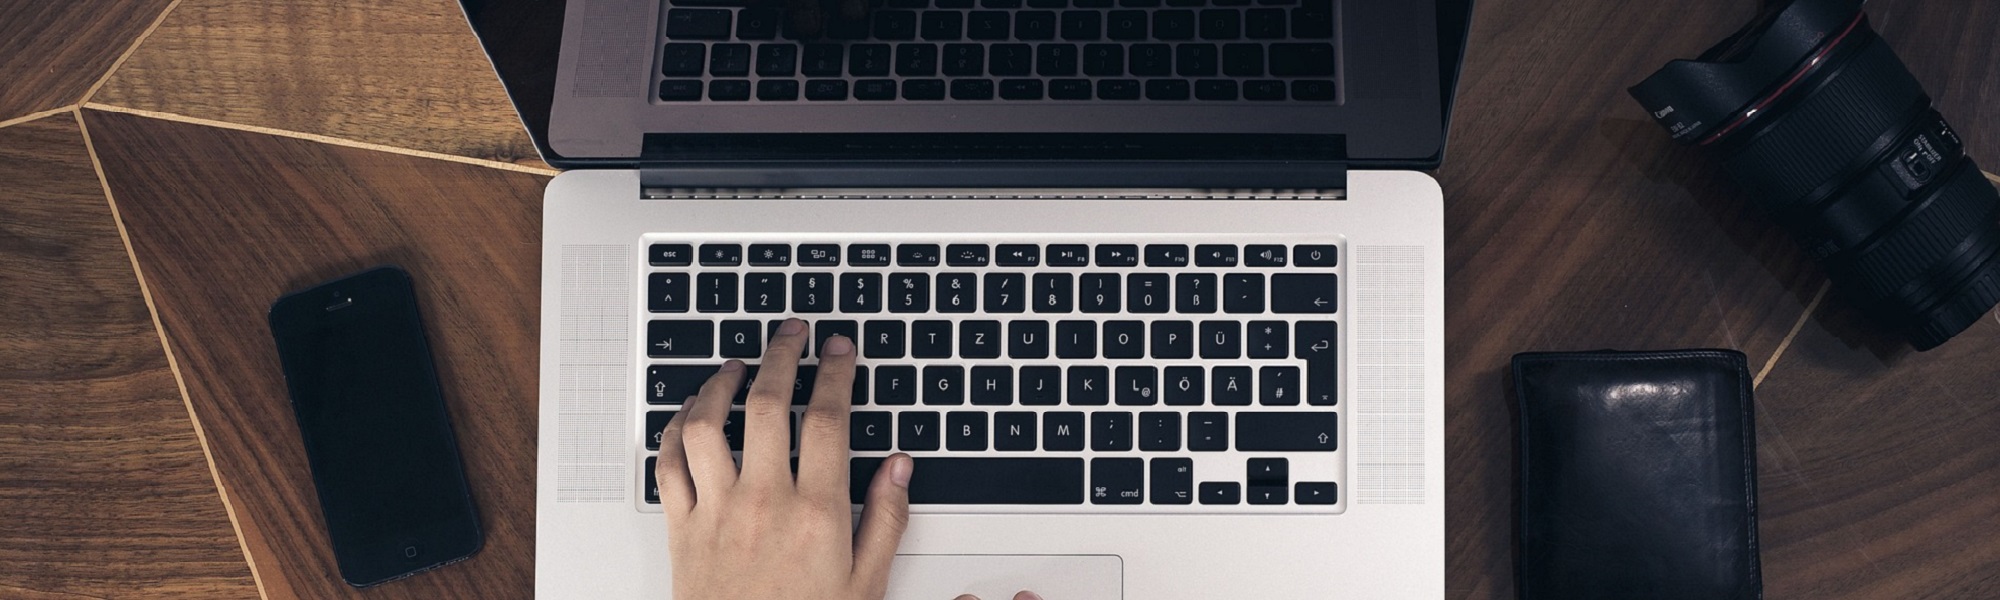 A hand typing on a laptop keyboard